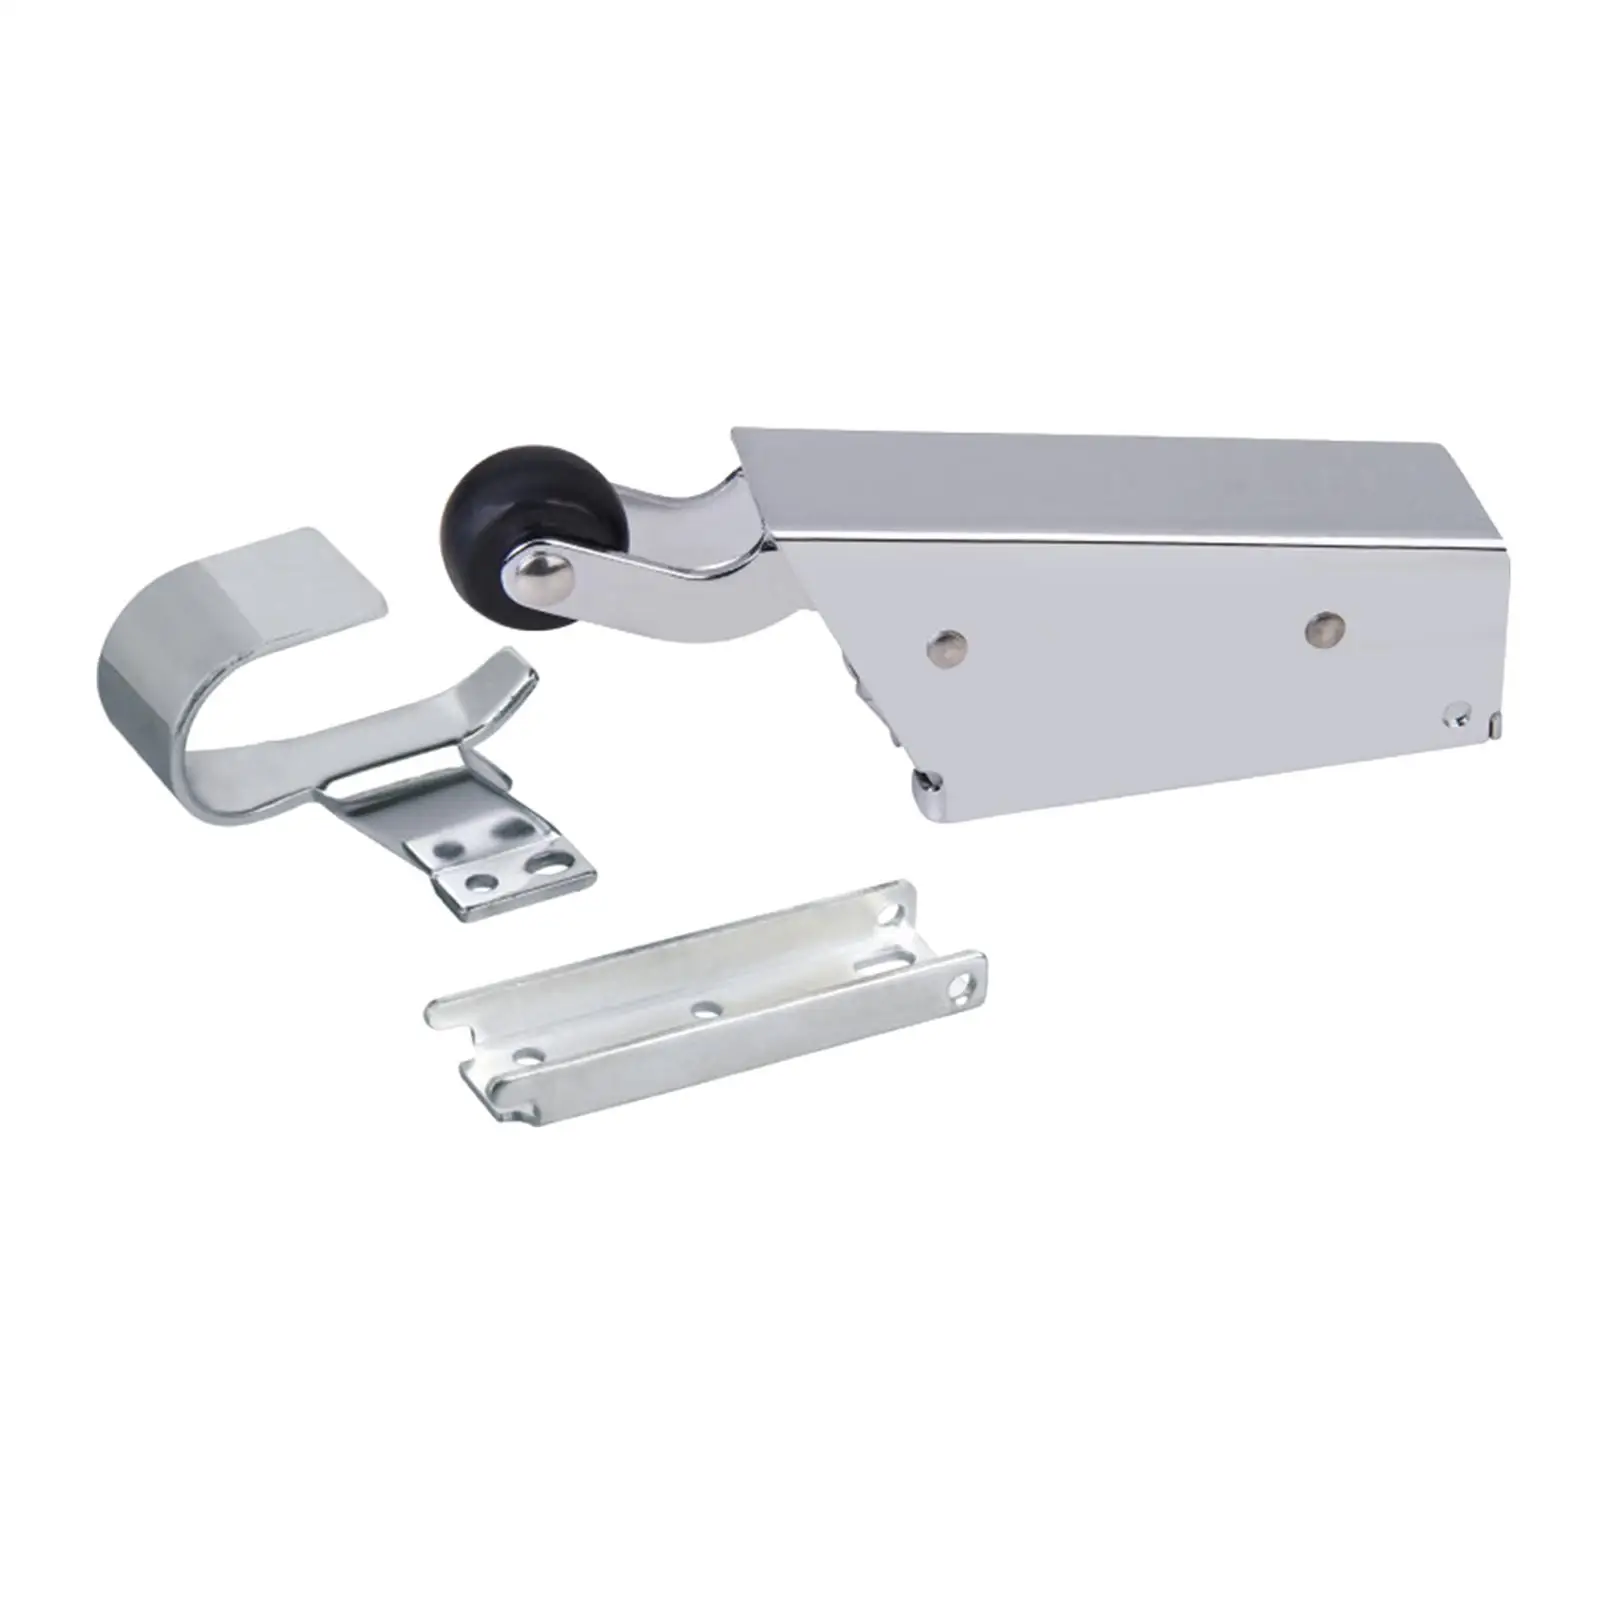 Spring Action Doors Closer Concealed Mounting Walk in Coolers Office Automatic Self Closing Adjustable Steel School